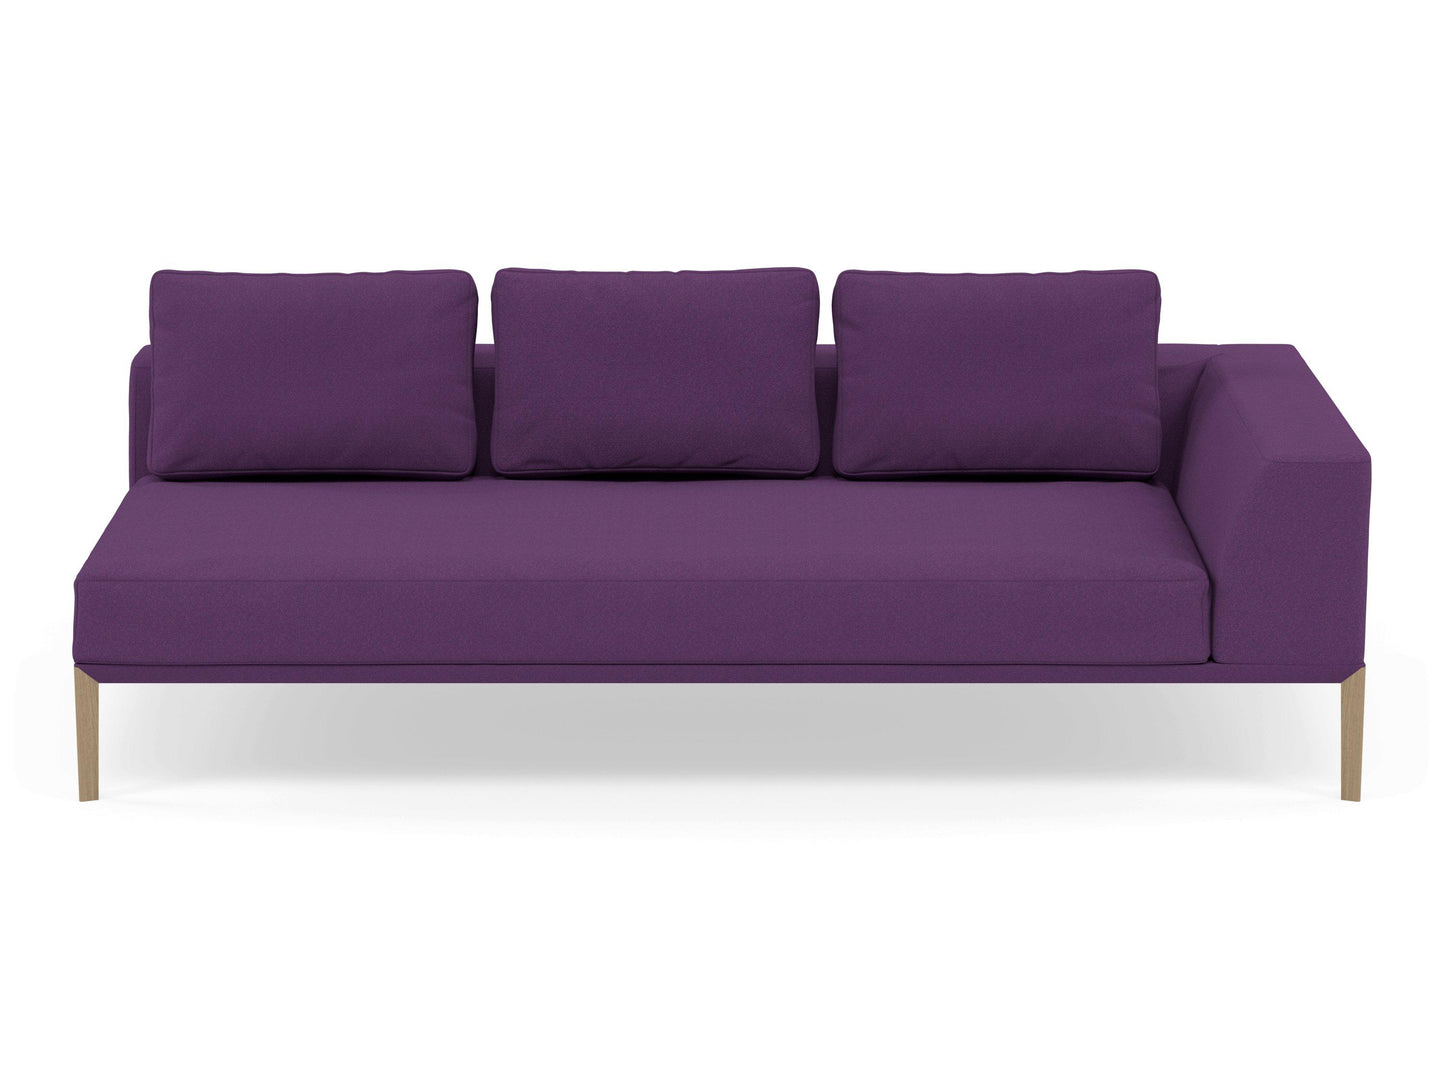 Modern 3 Seater Chaise Lounge Style Sofa with Left Armrest in Deep Purple Fabric-Natural Oak-Distinct Designs (London) Ltd